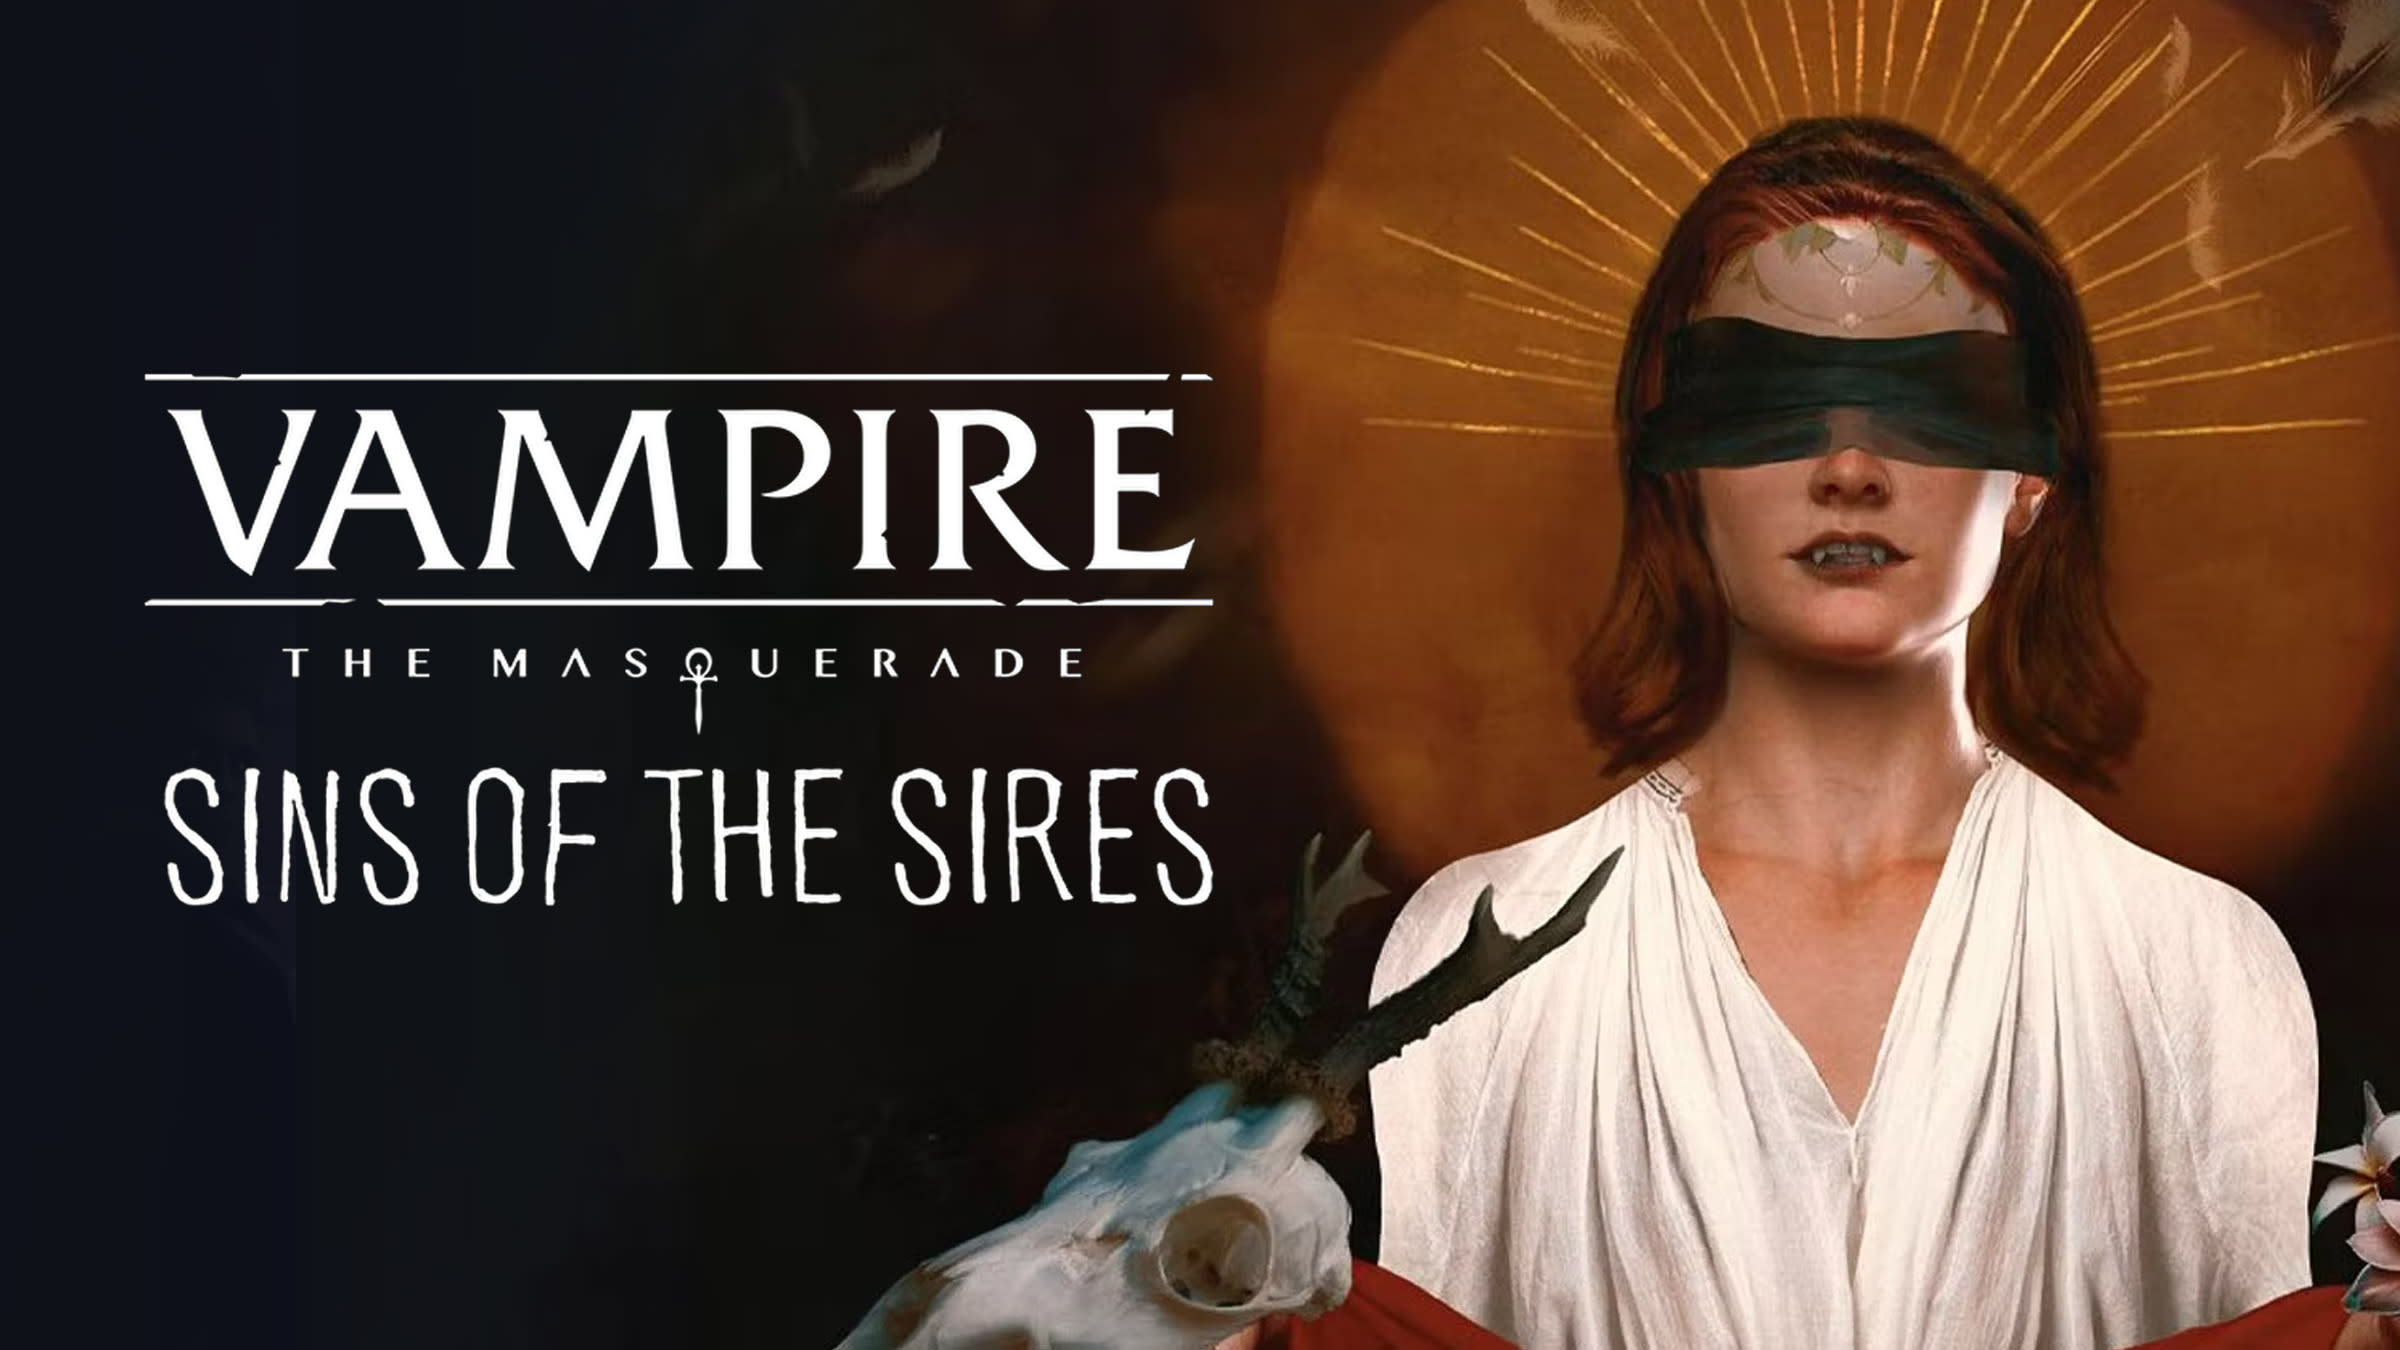 Vampire: The Masquerade - Sins of the Sires